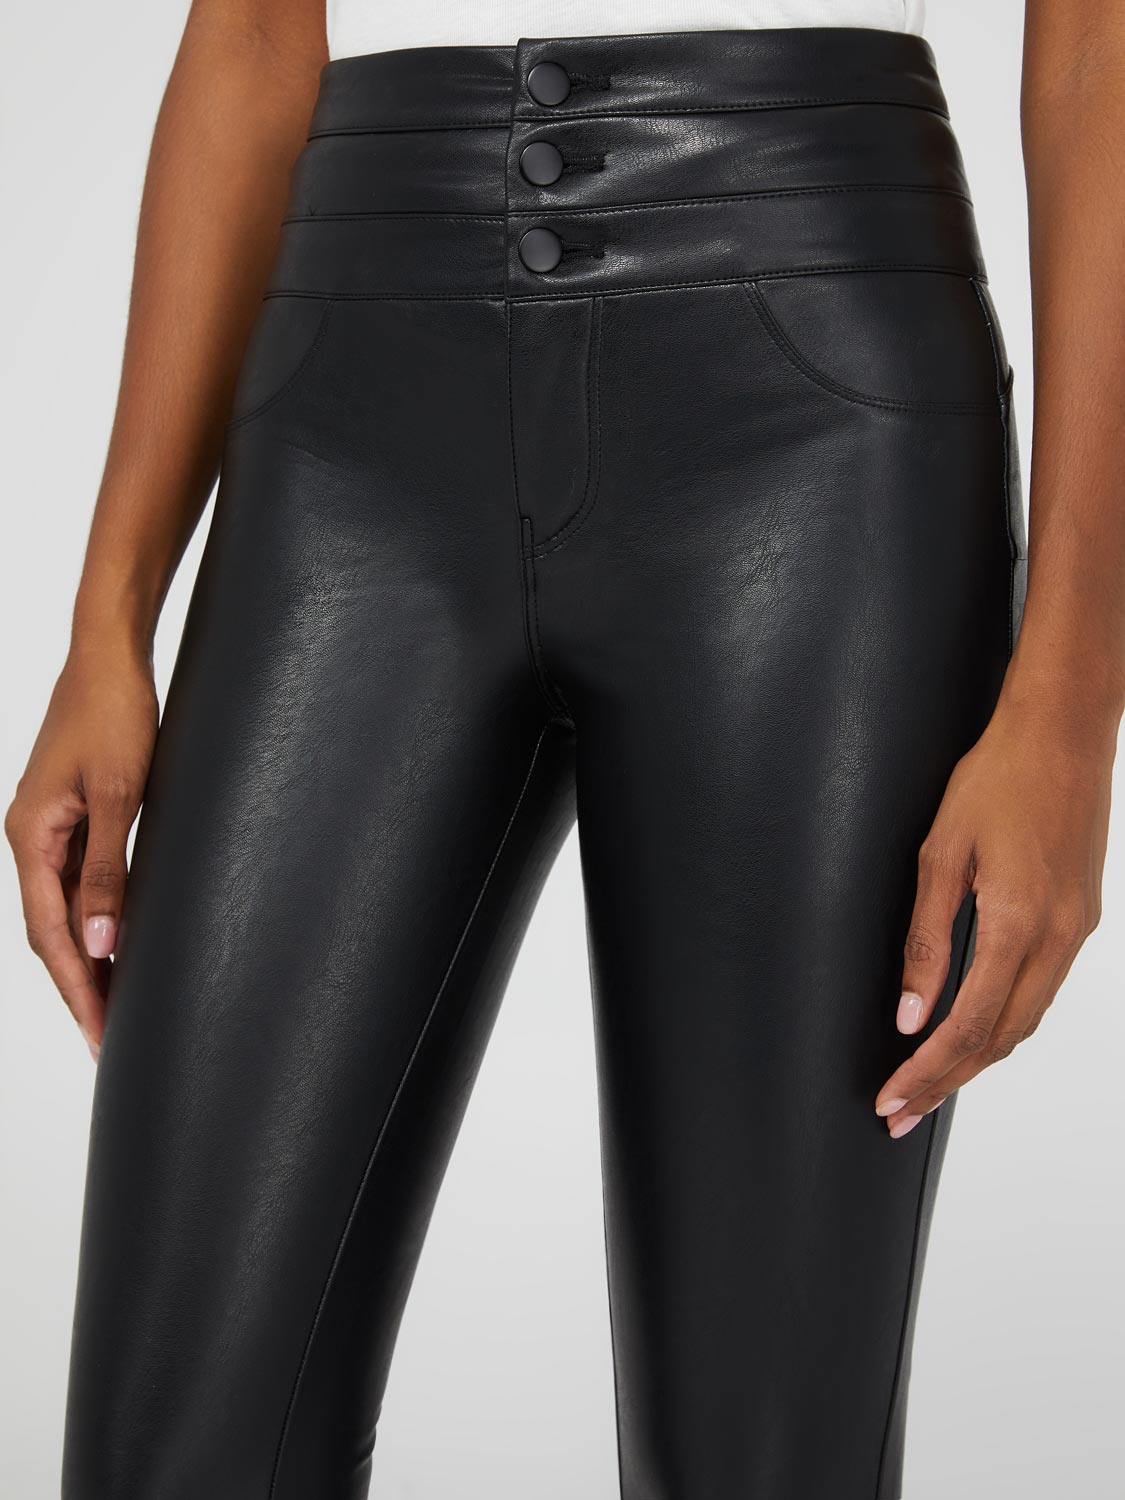 Black Faux Leather Moto PU High Waist Leather Leggings Instagram Slim Fit  Push Up Long Clubwear Pants For Women From Yuwenyue, $13.04